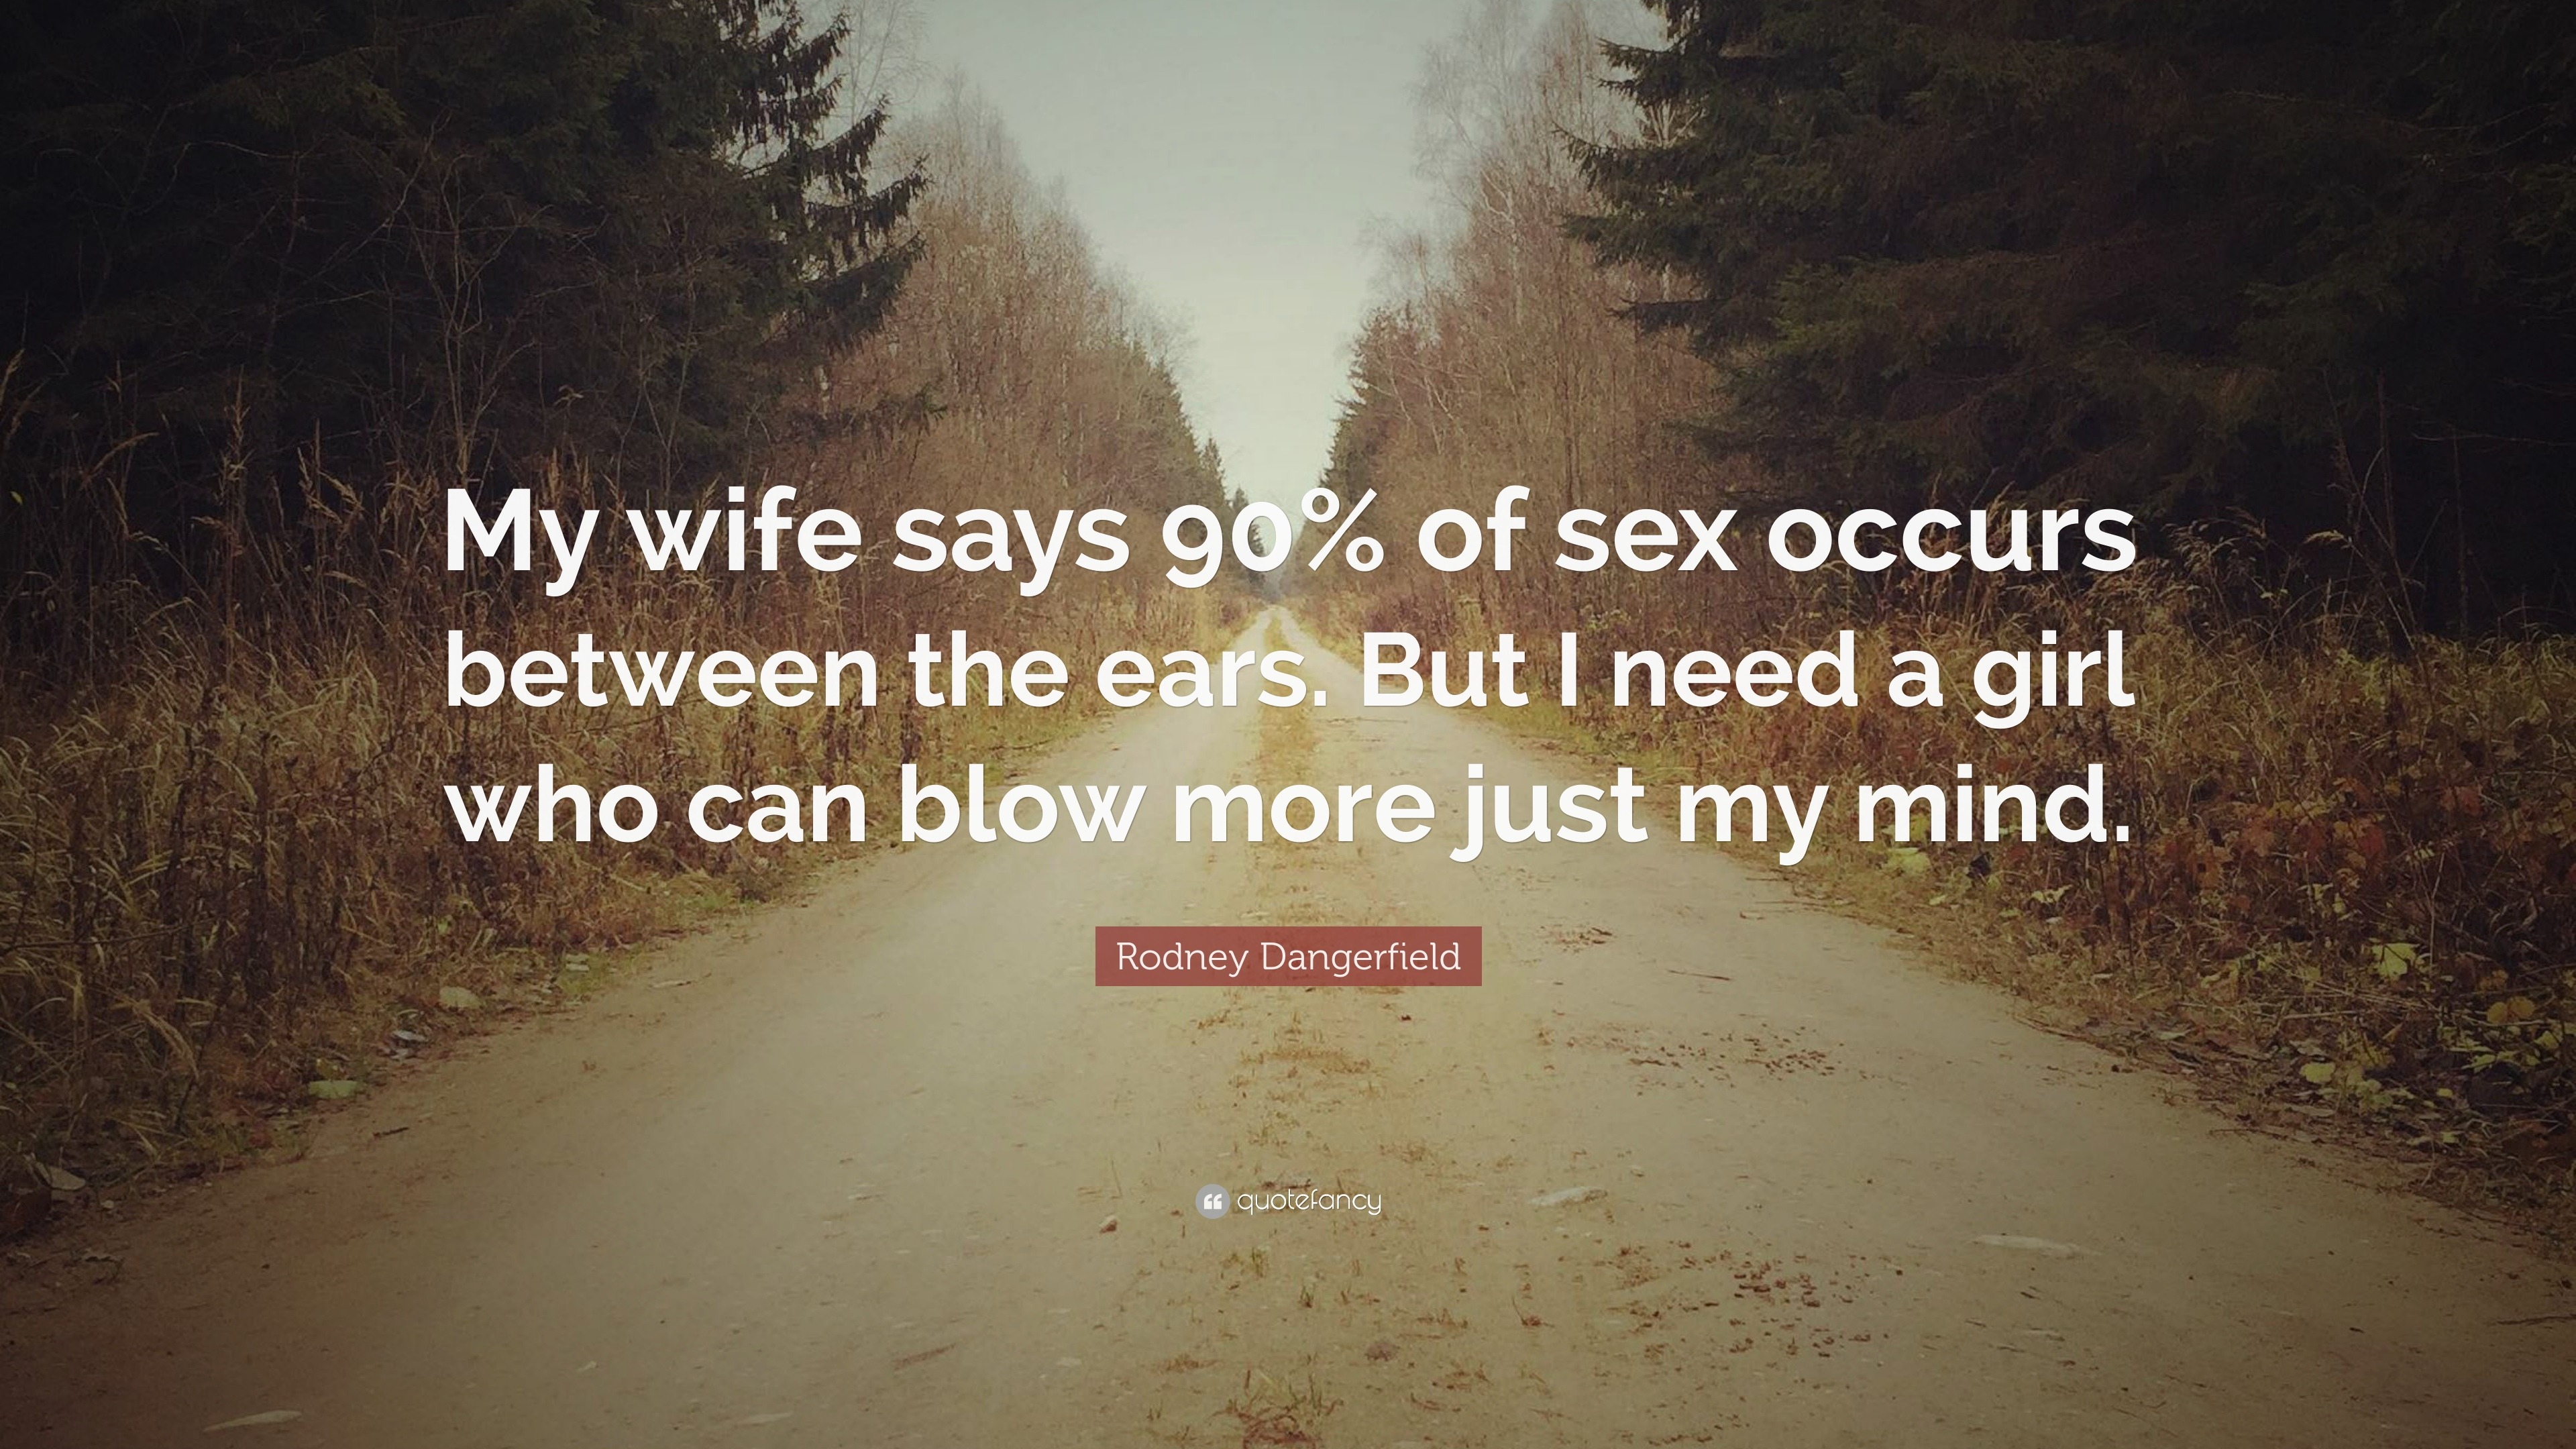 Rodney Dangerfield Quote “My wife says 90% of sex occurs between the ears image